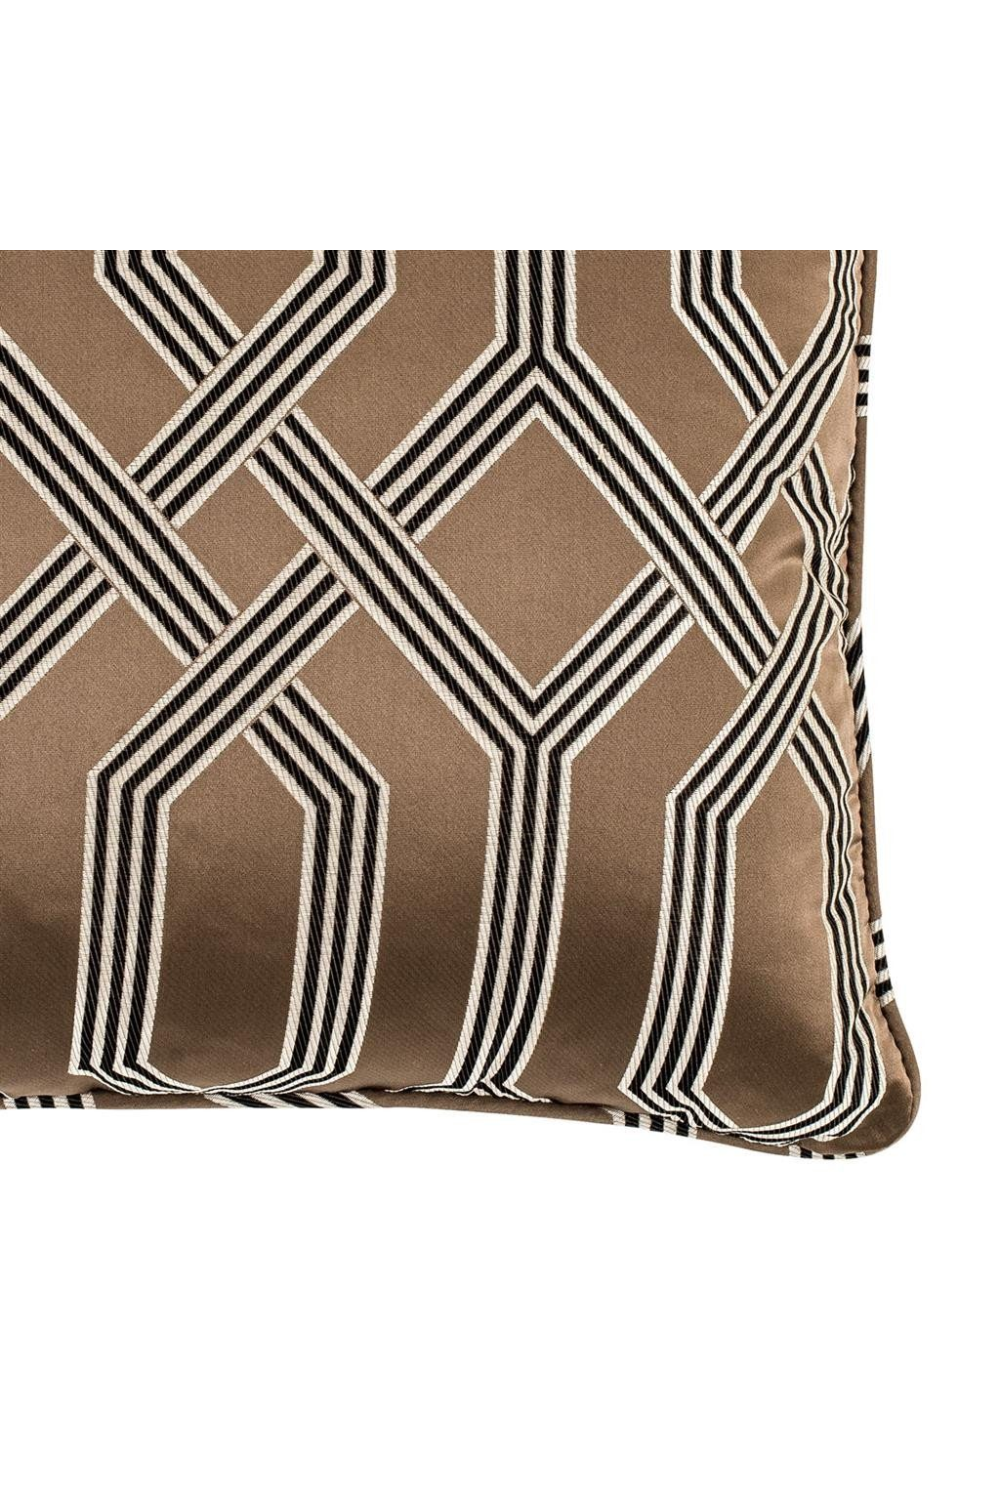 18x18 Boucle Foil Marble With Tassels Square Throw Pillow Ivory